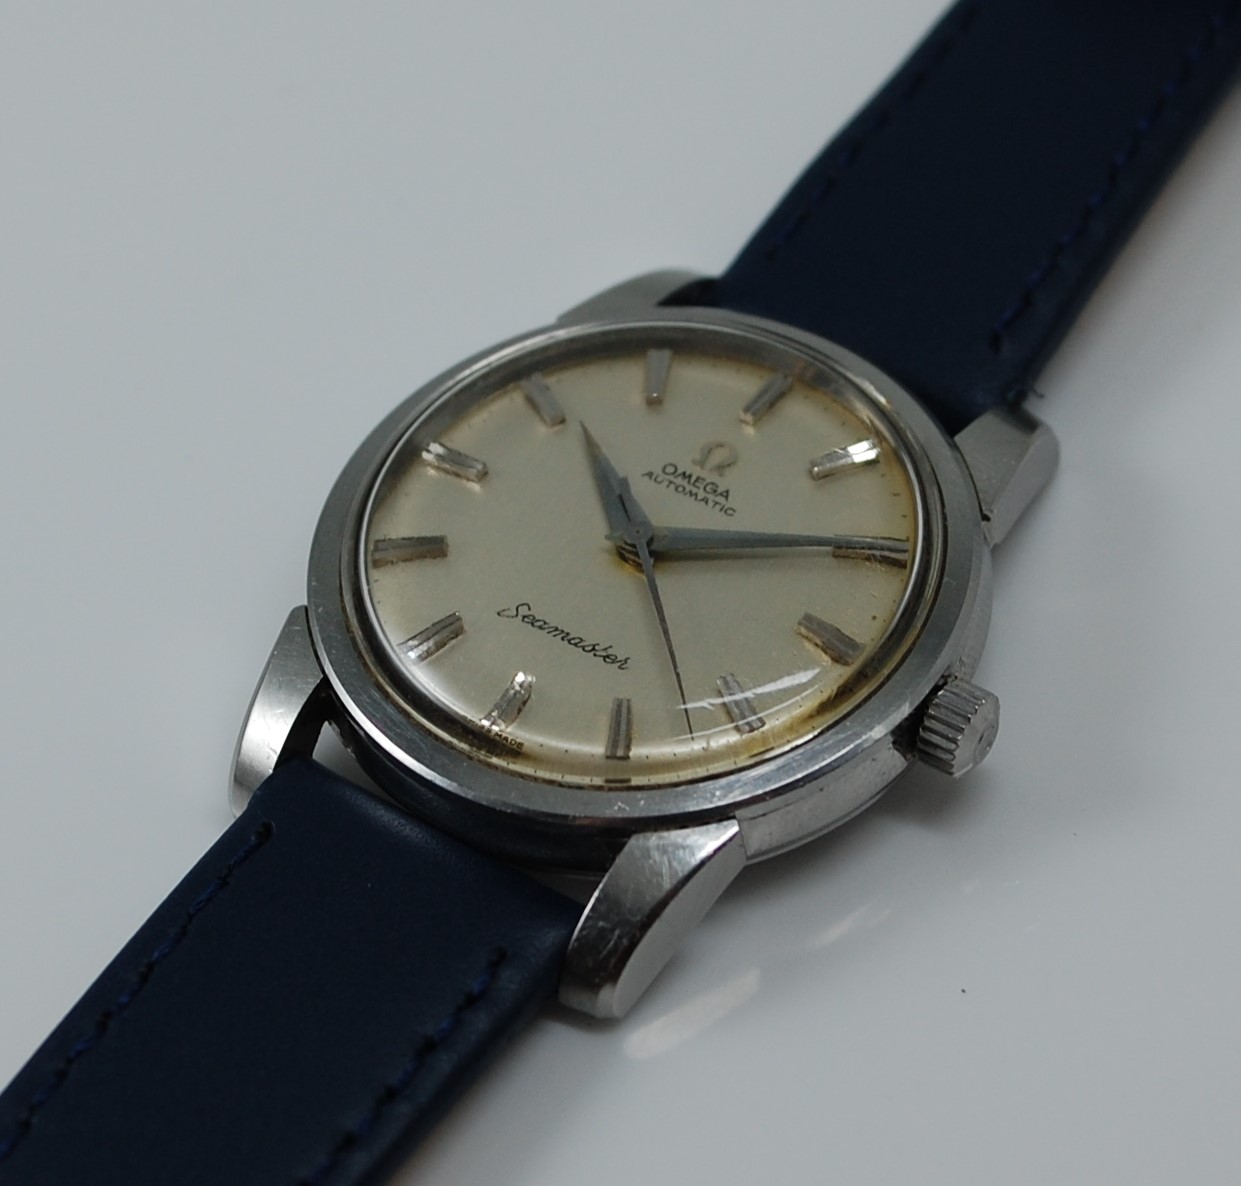 SOLD 1961 Omega Seamaster Automatic - Birth Year Watches